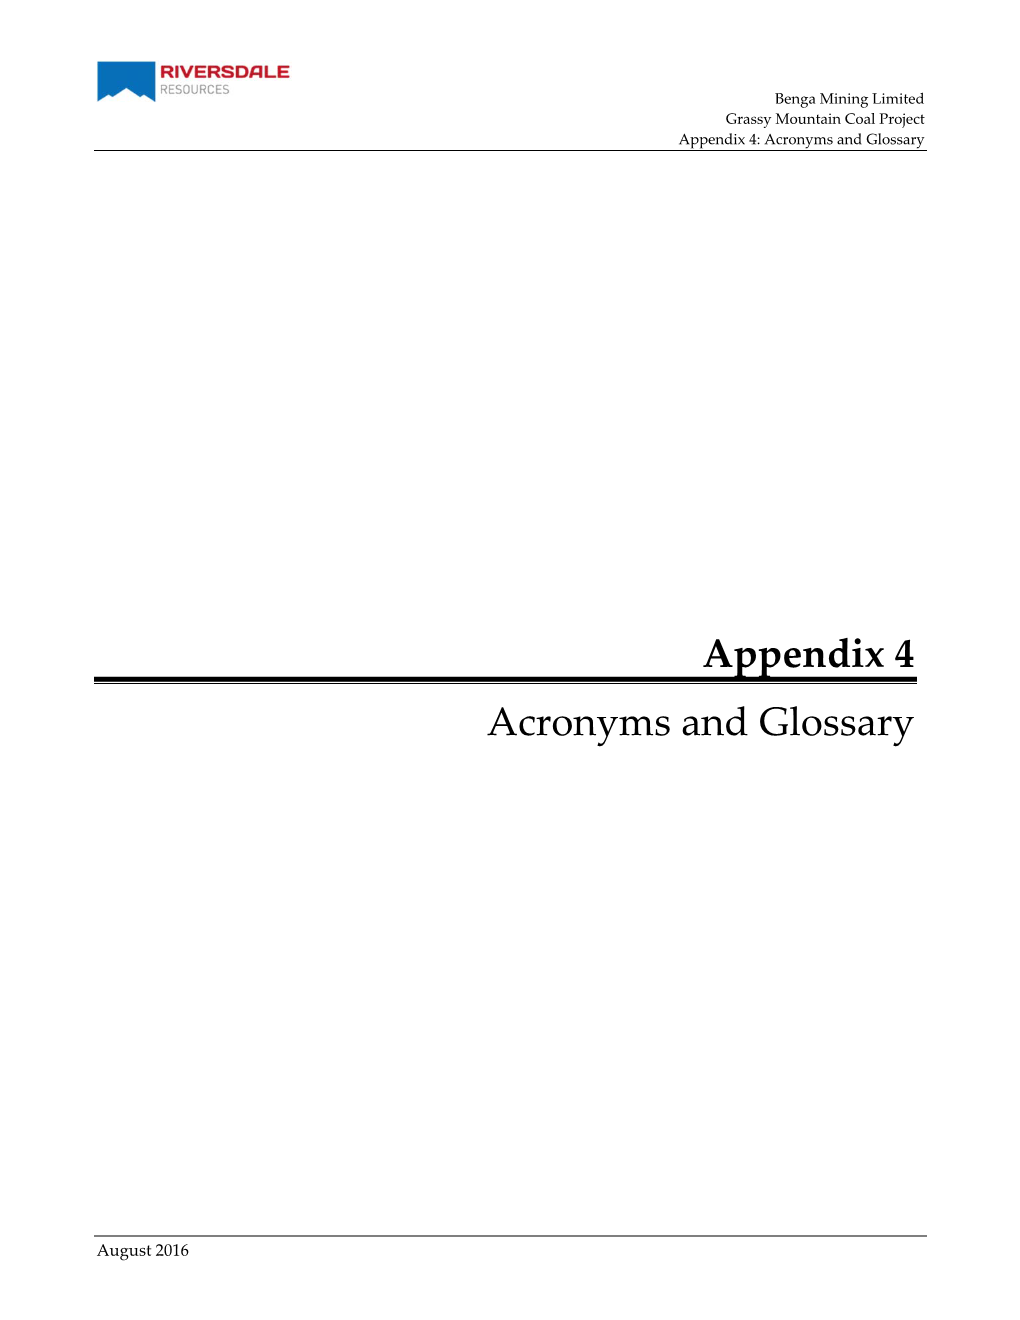 Appendix 4 Acronyms and Glossary